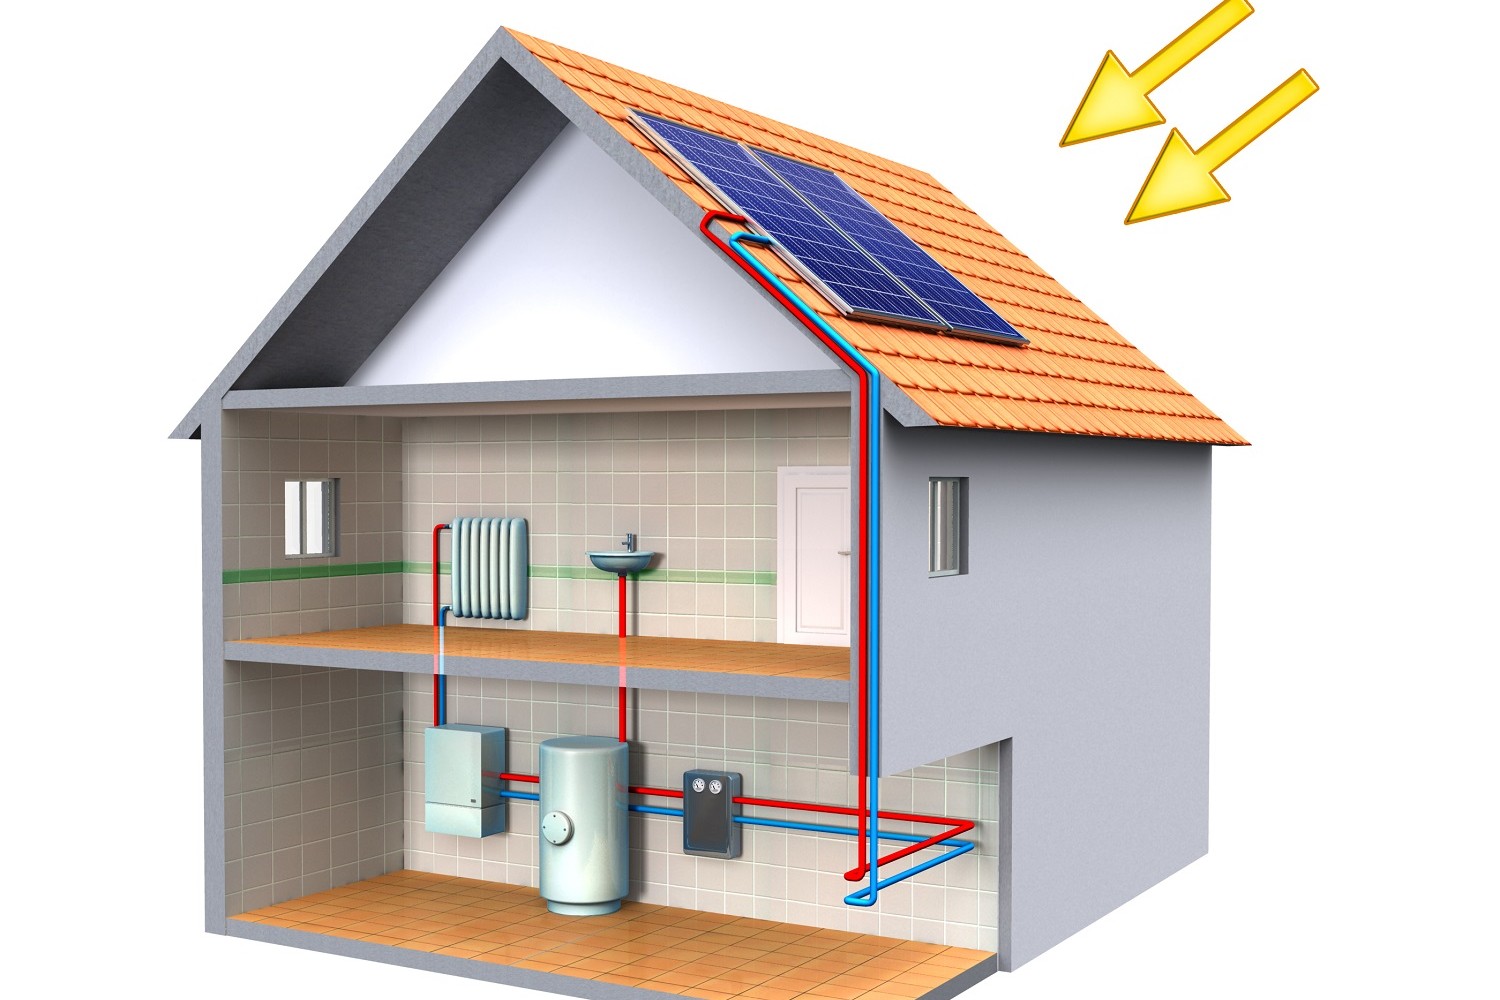 Solar thermal energy system in a modern house. Digital illustration, clipping path included.